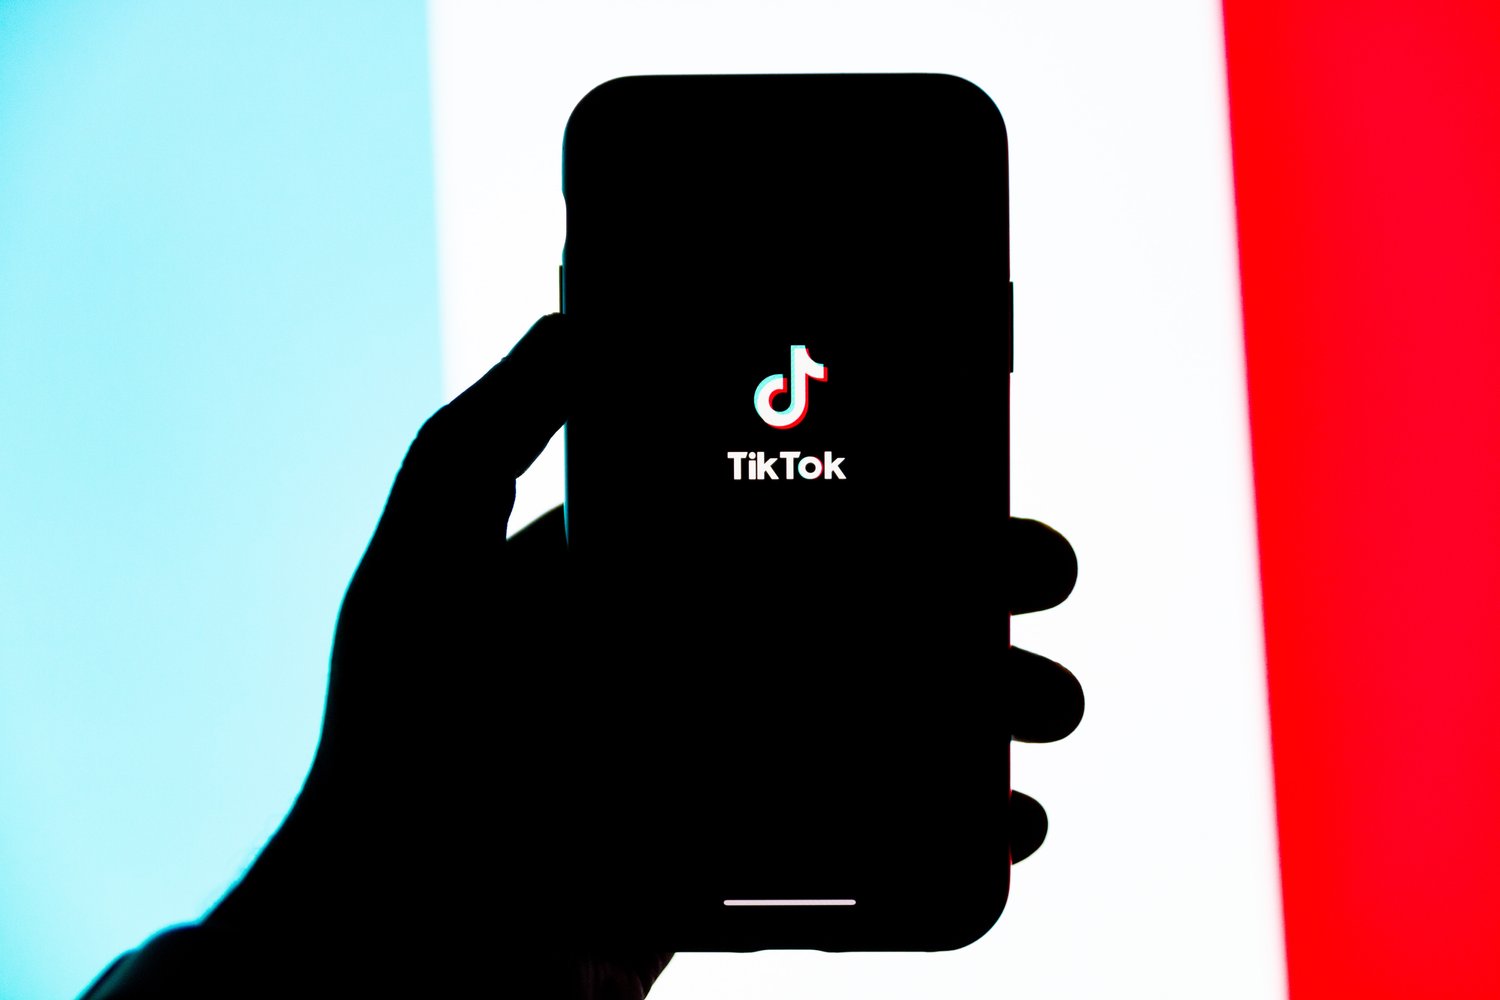 TikTok users beware: Hackers could swap your videos with their own